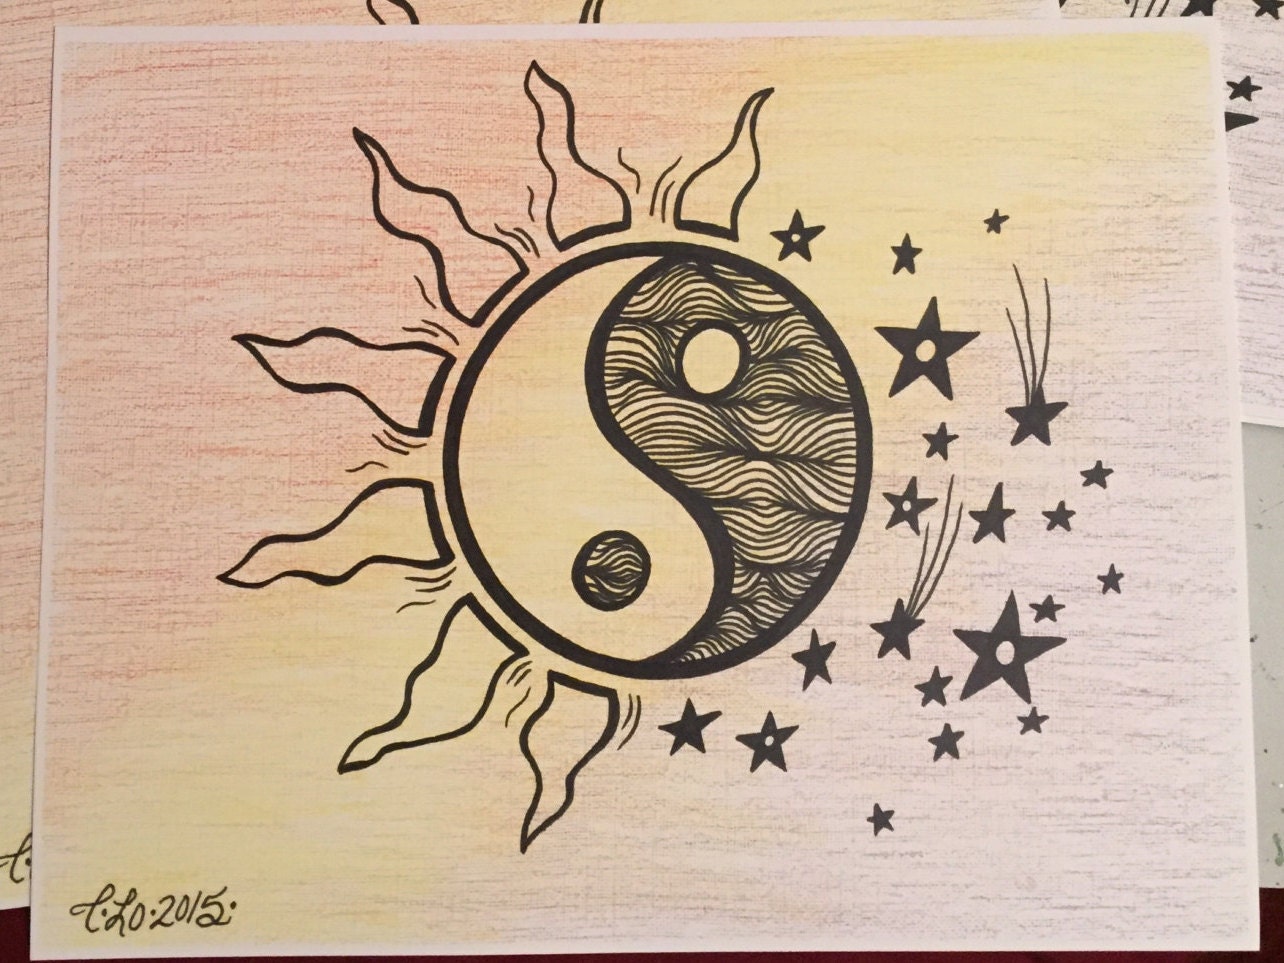 Day & Night Ying Yang Prints/multicolored/colored pencil/paint